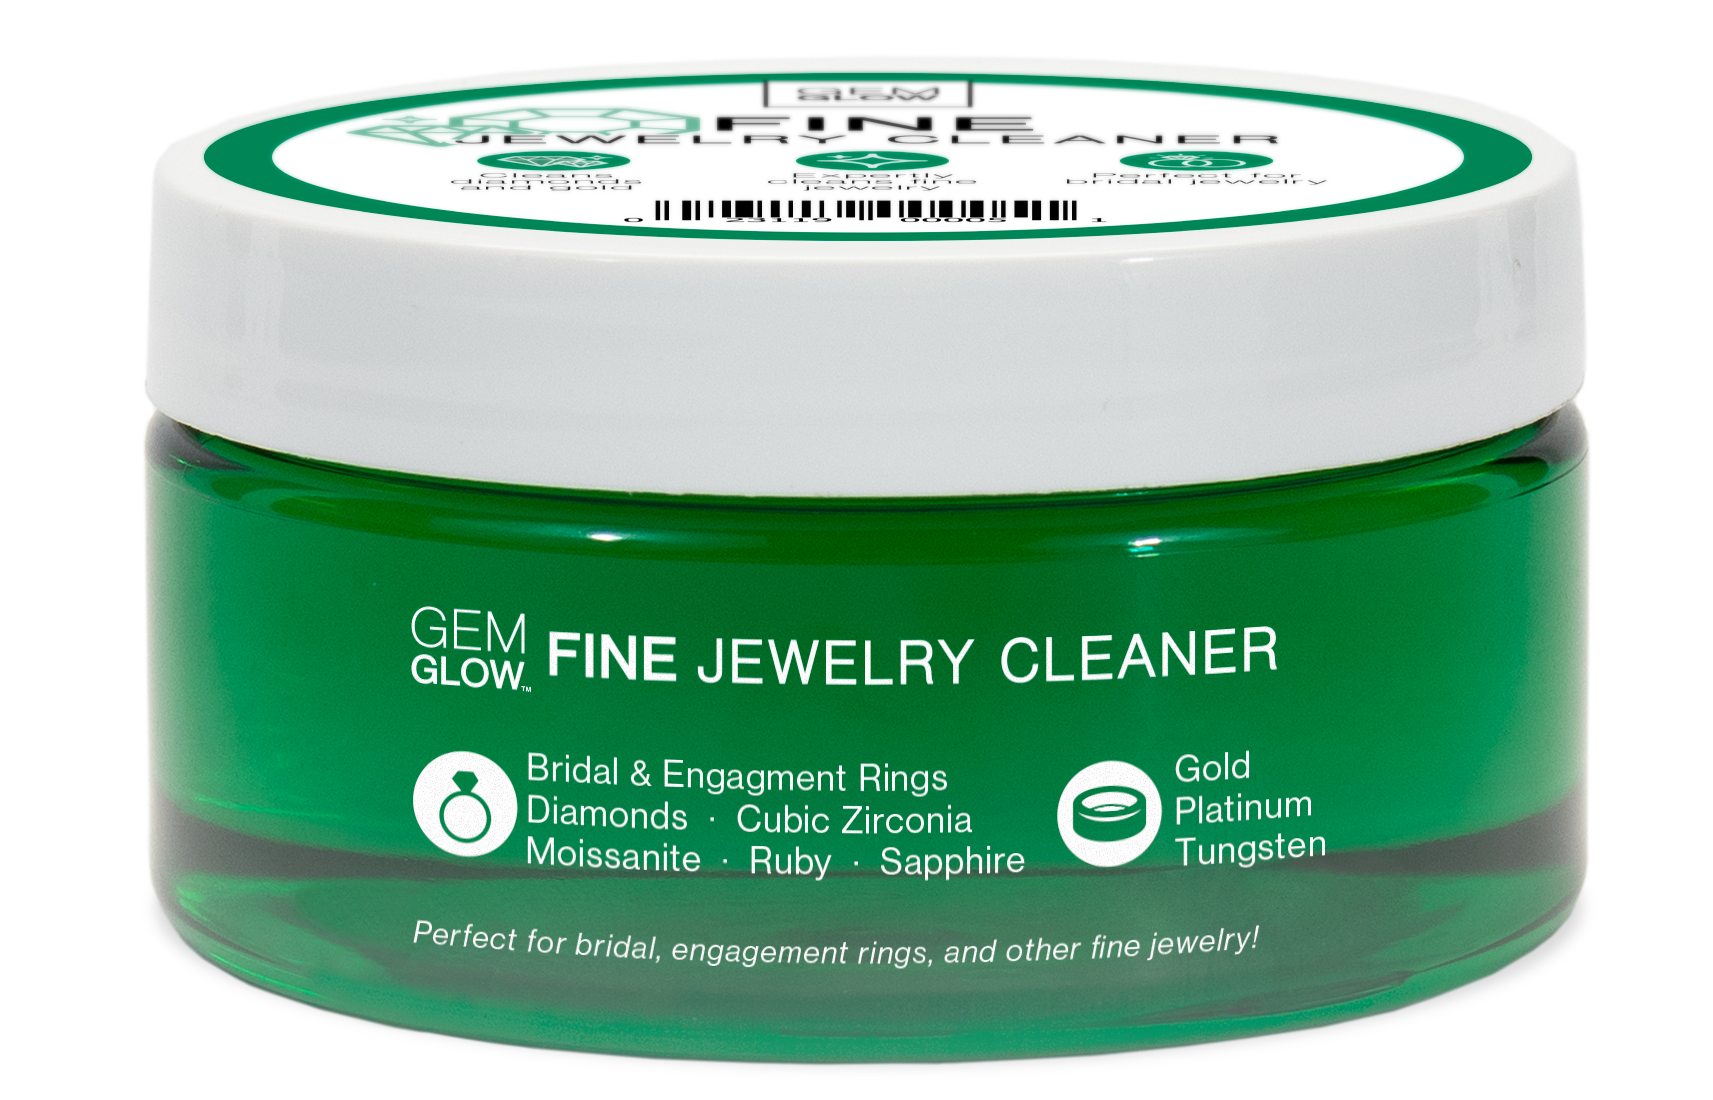 Jewellery Cleaning Product Bundle  FV Jewellery - Fabuleux Vous Jewellery